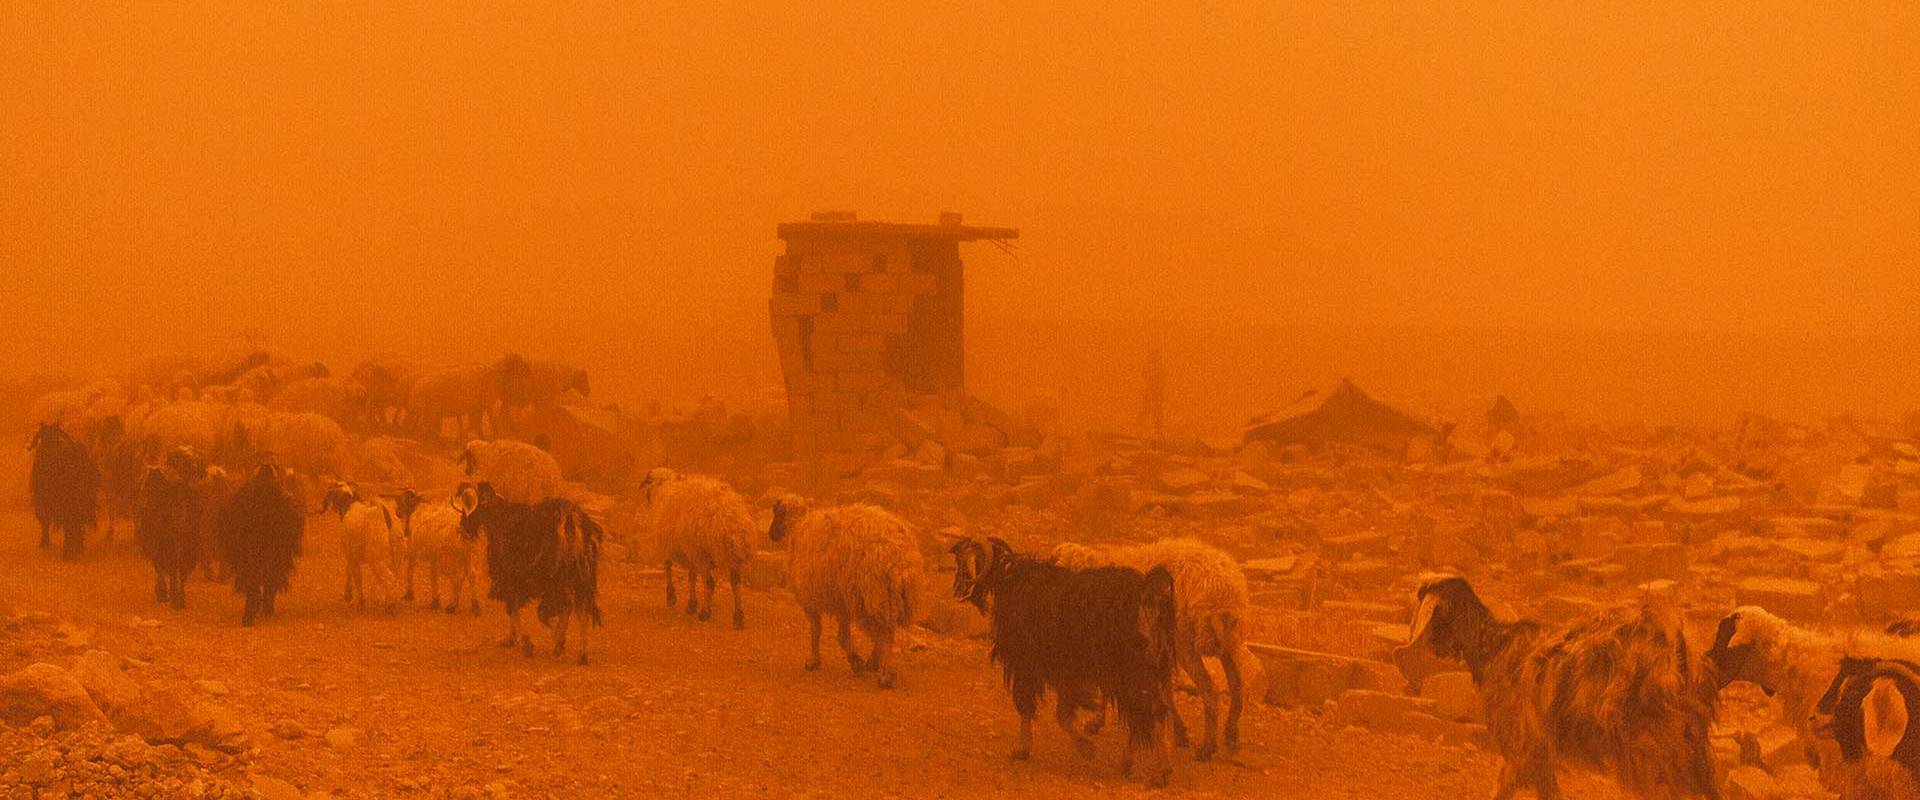 Agriculture, conflict and climate change in Iraq